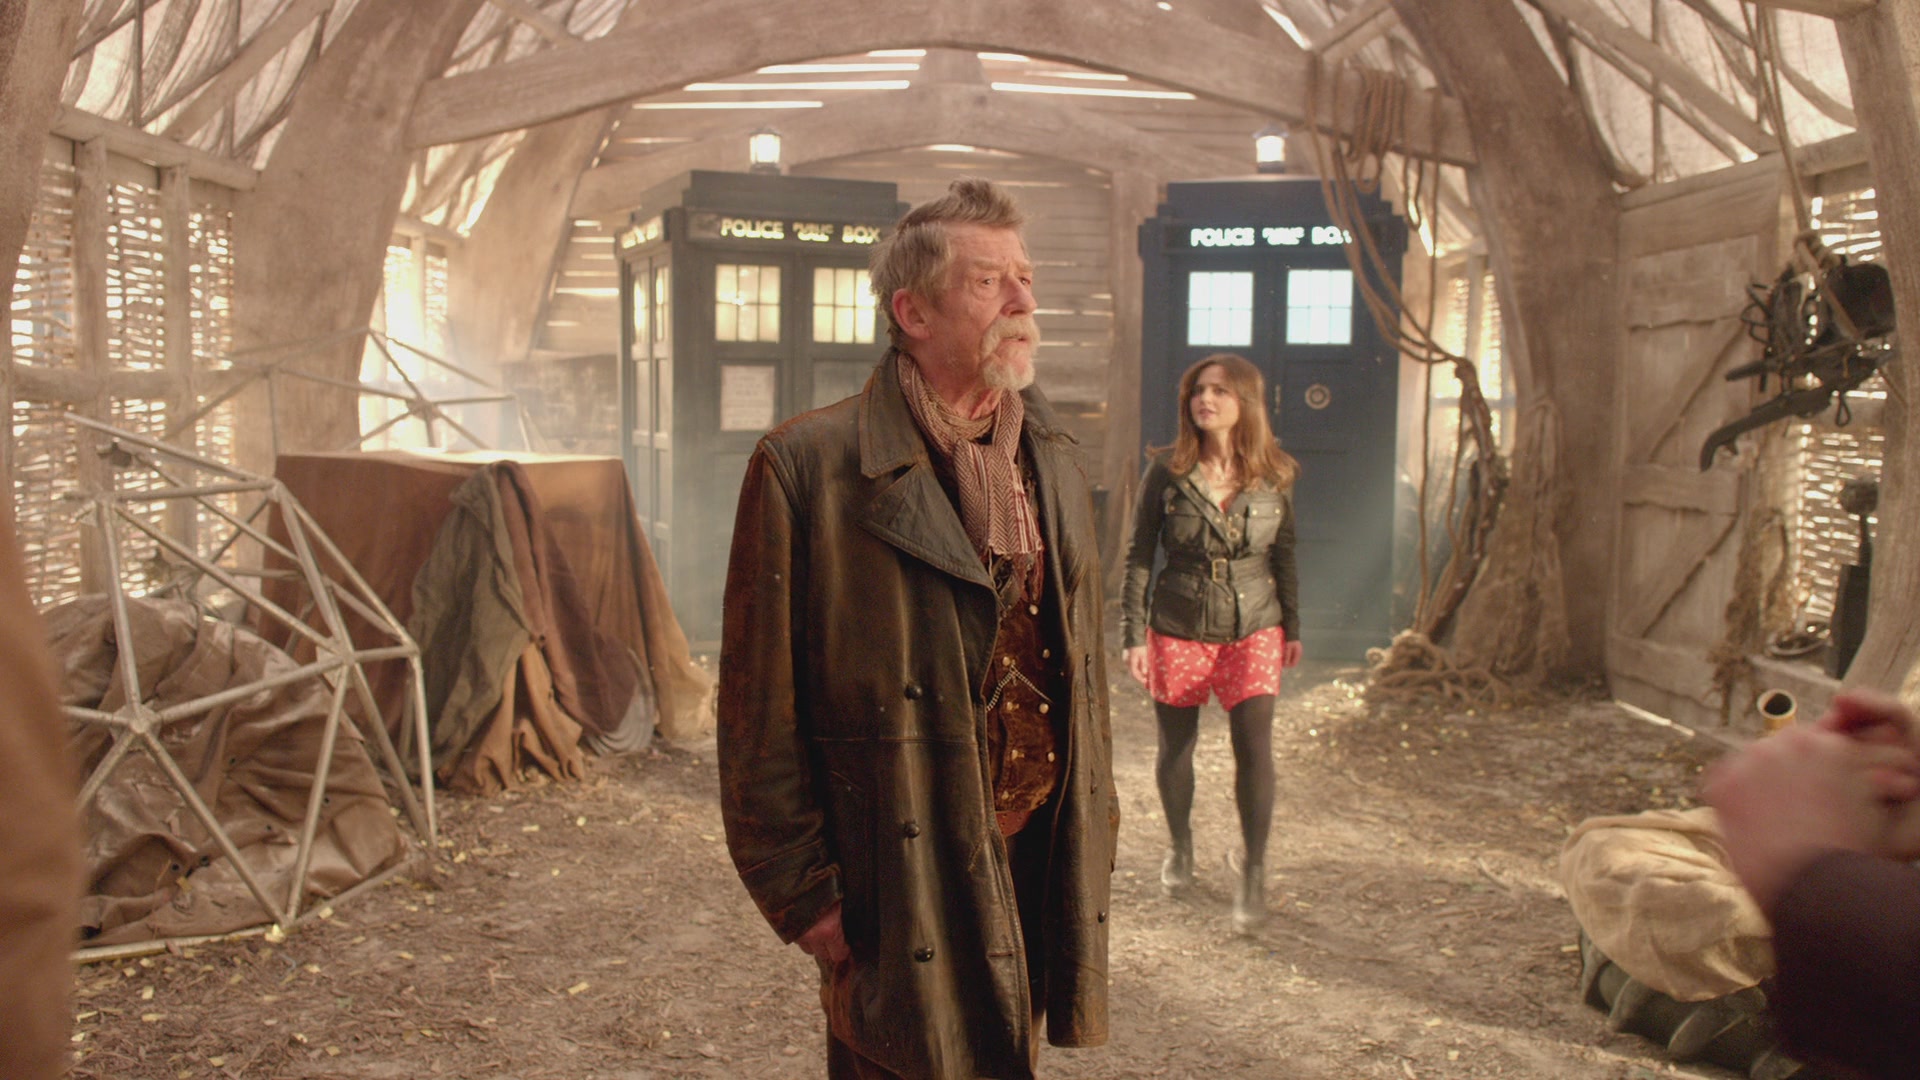 DayOfTheDoctor-Caps-1187.jpg